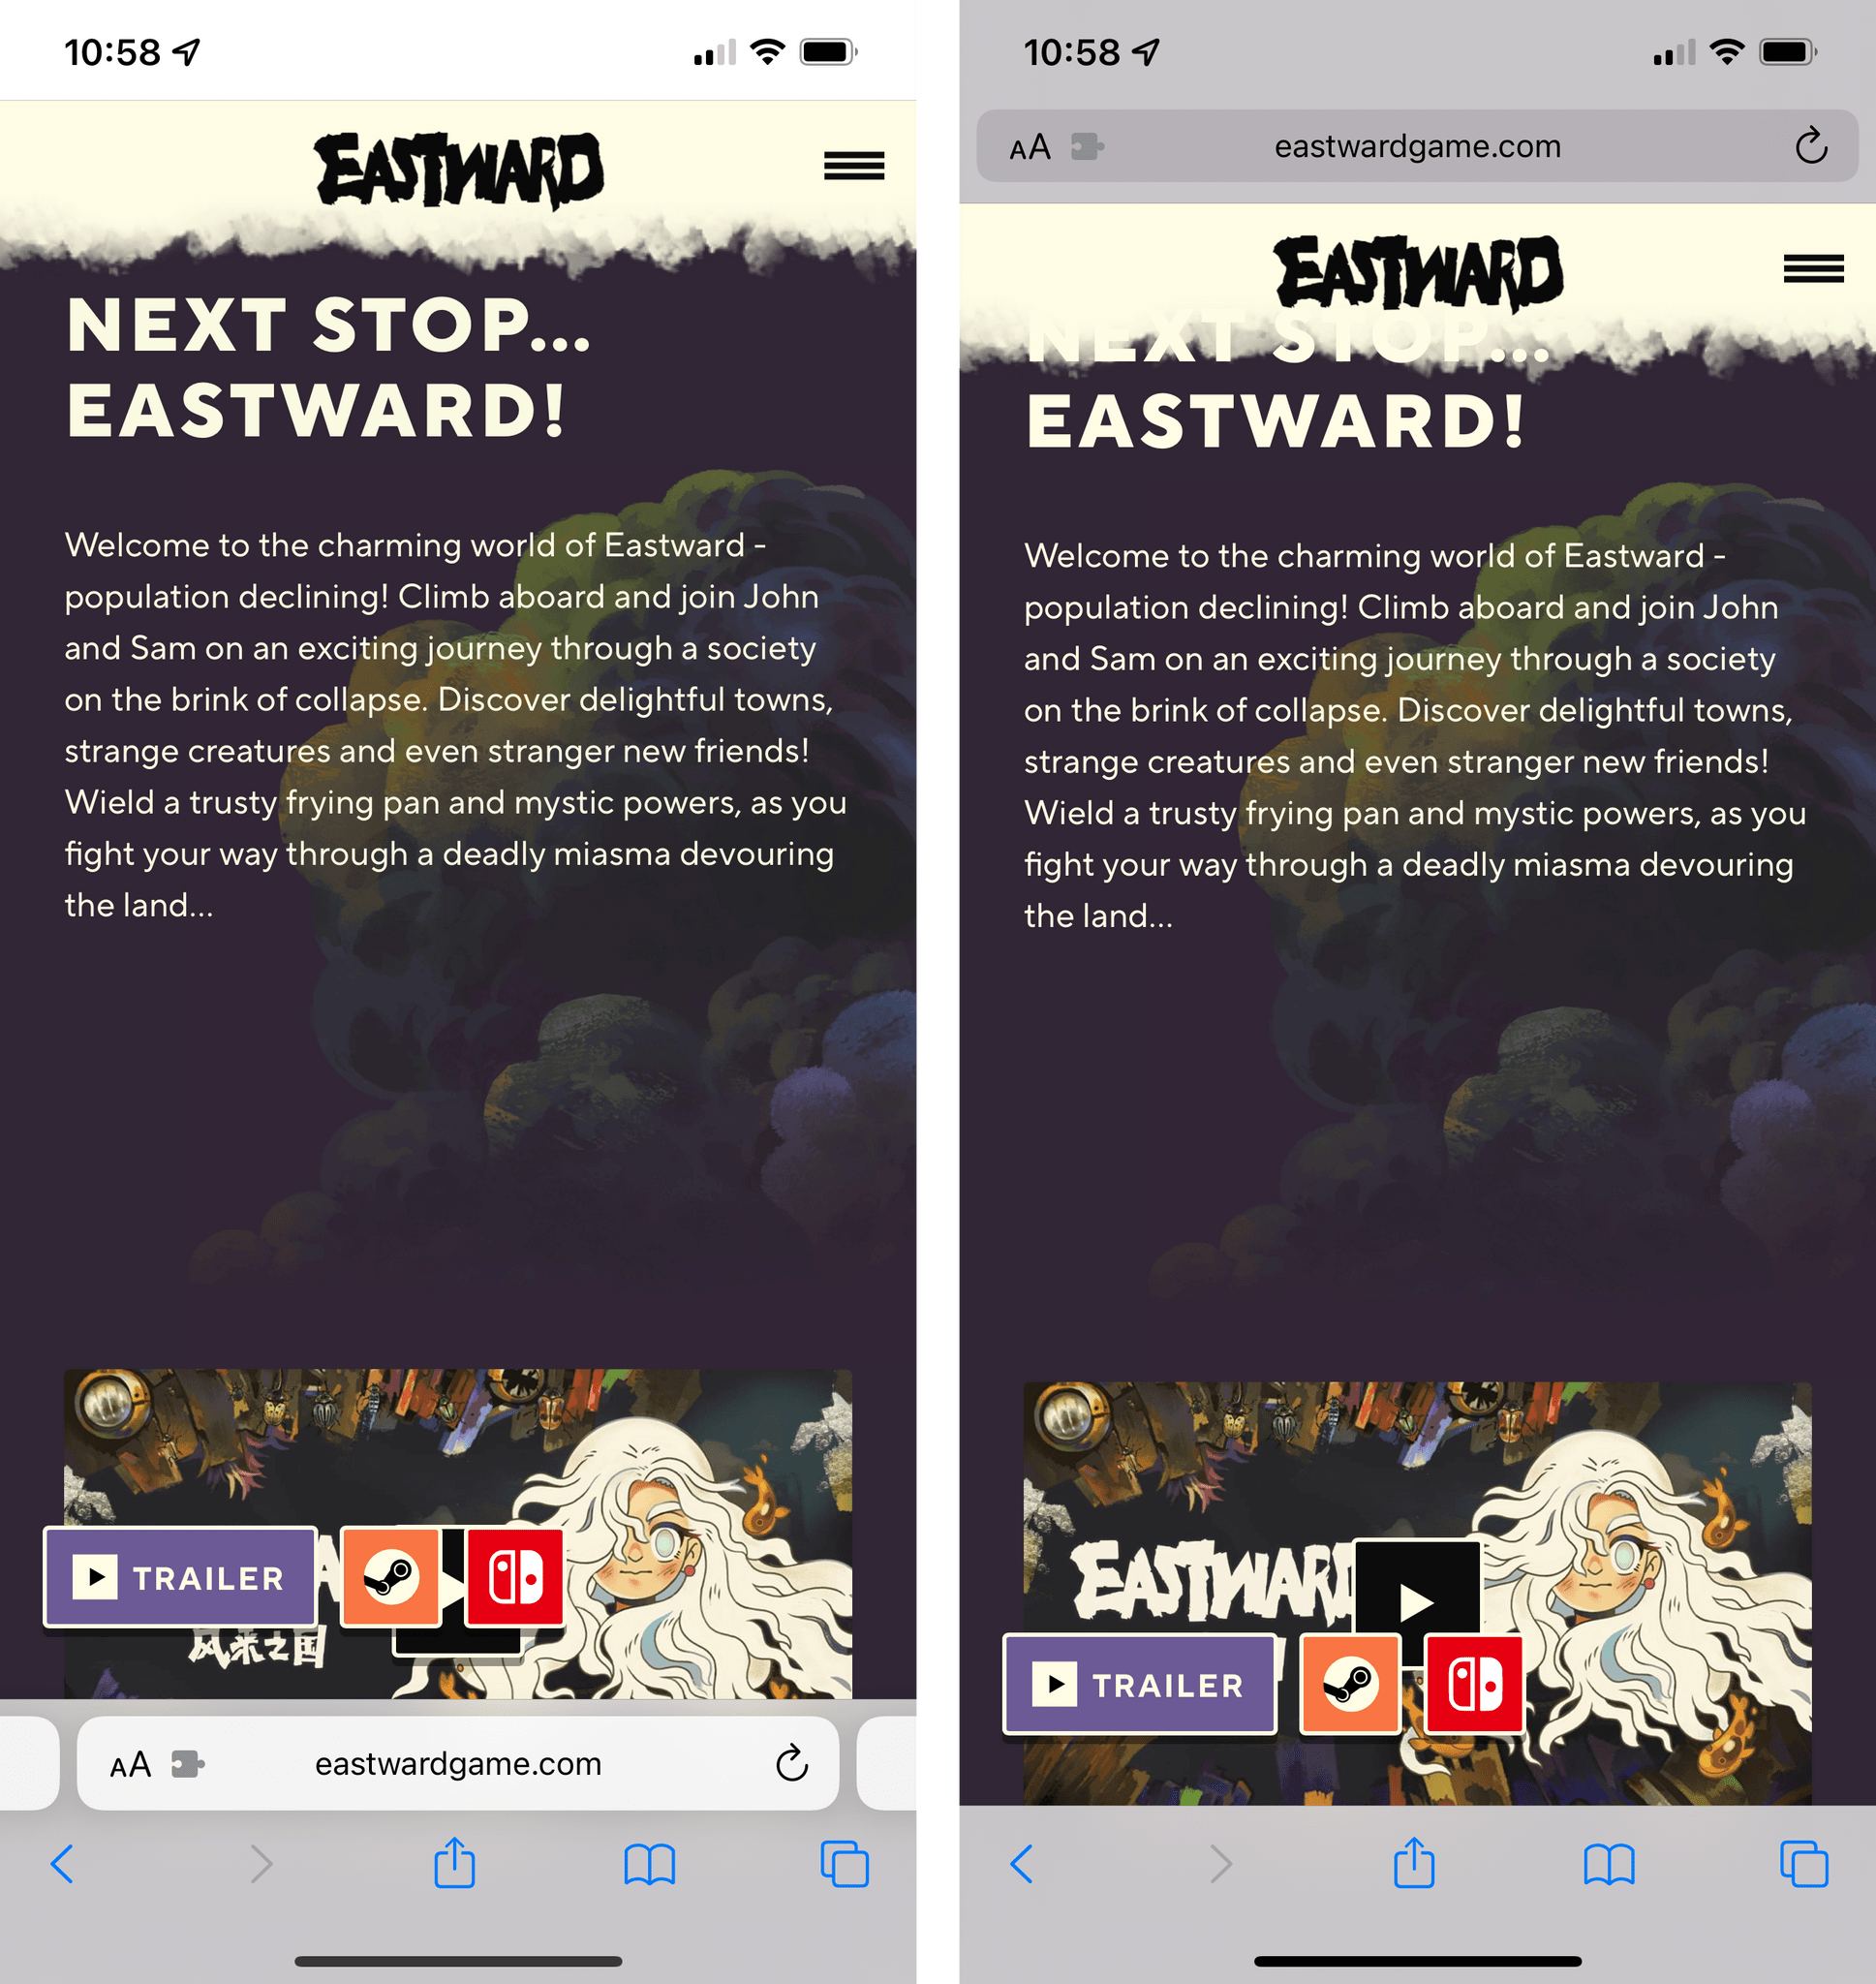 If you want, you can revert to the old Safari design with a setting \(right\).